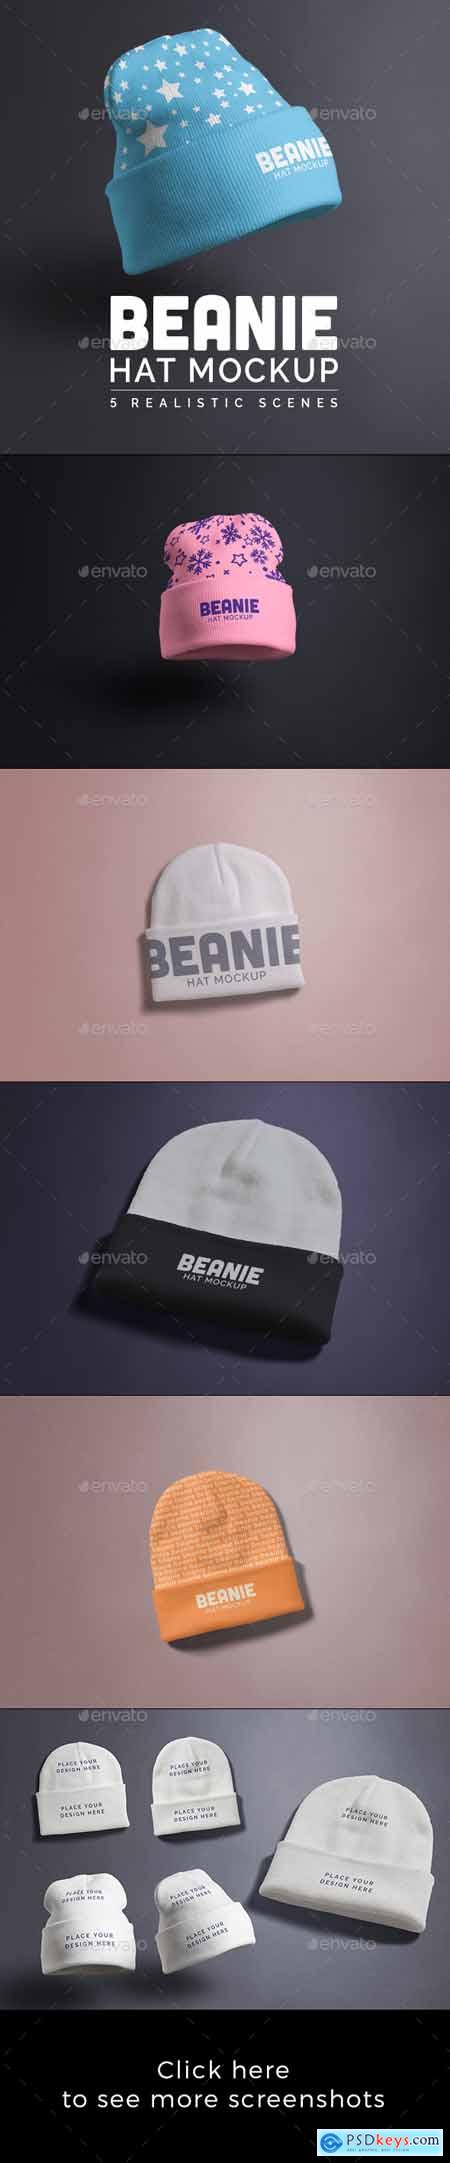 Graphicriver Beanie Hat Mock-up 26535603